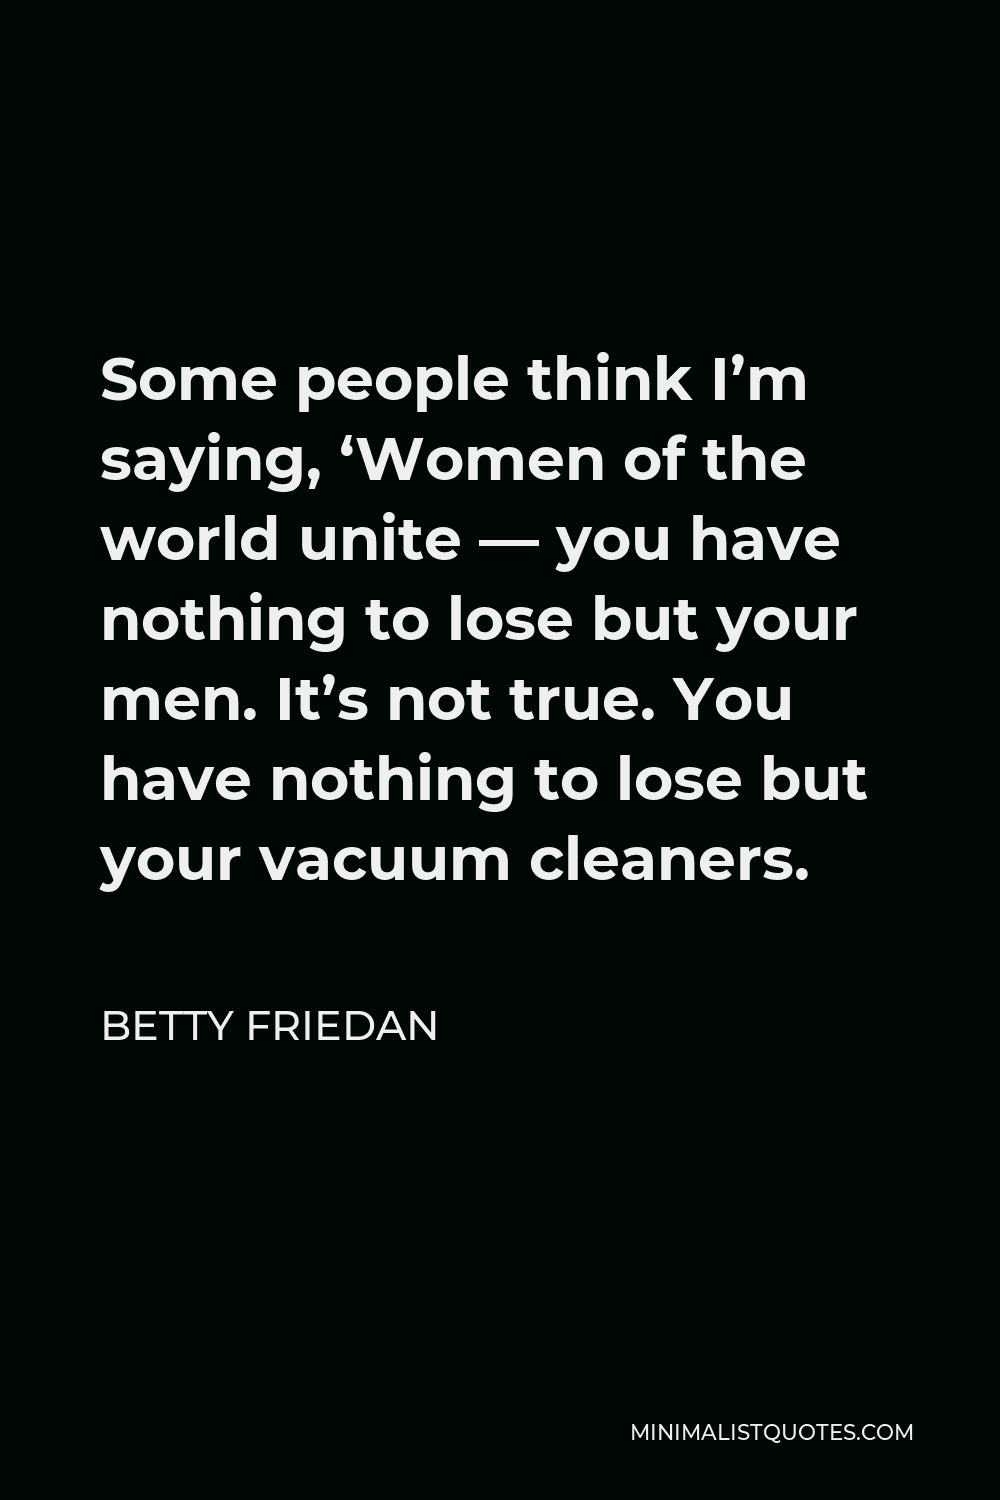 Betty Friedan Quote - Some people think I’m saying, ‘Women of the world unite — you have nothing to lose but your men. It’s not true. You have nothing to lose but your vacuum cleaners.